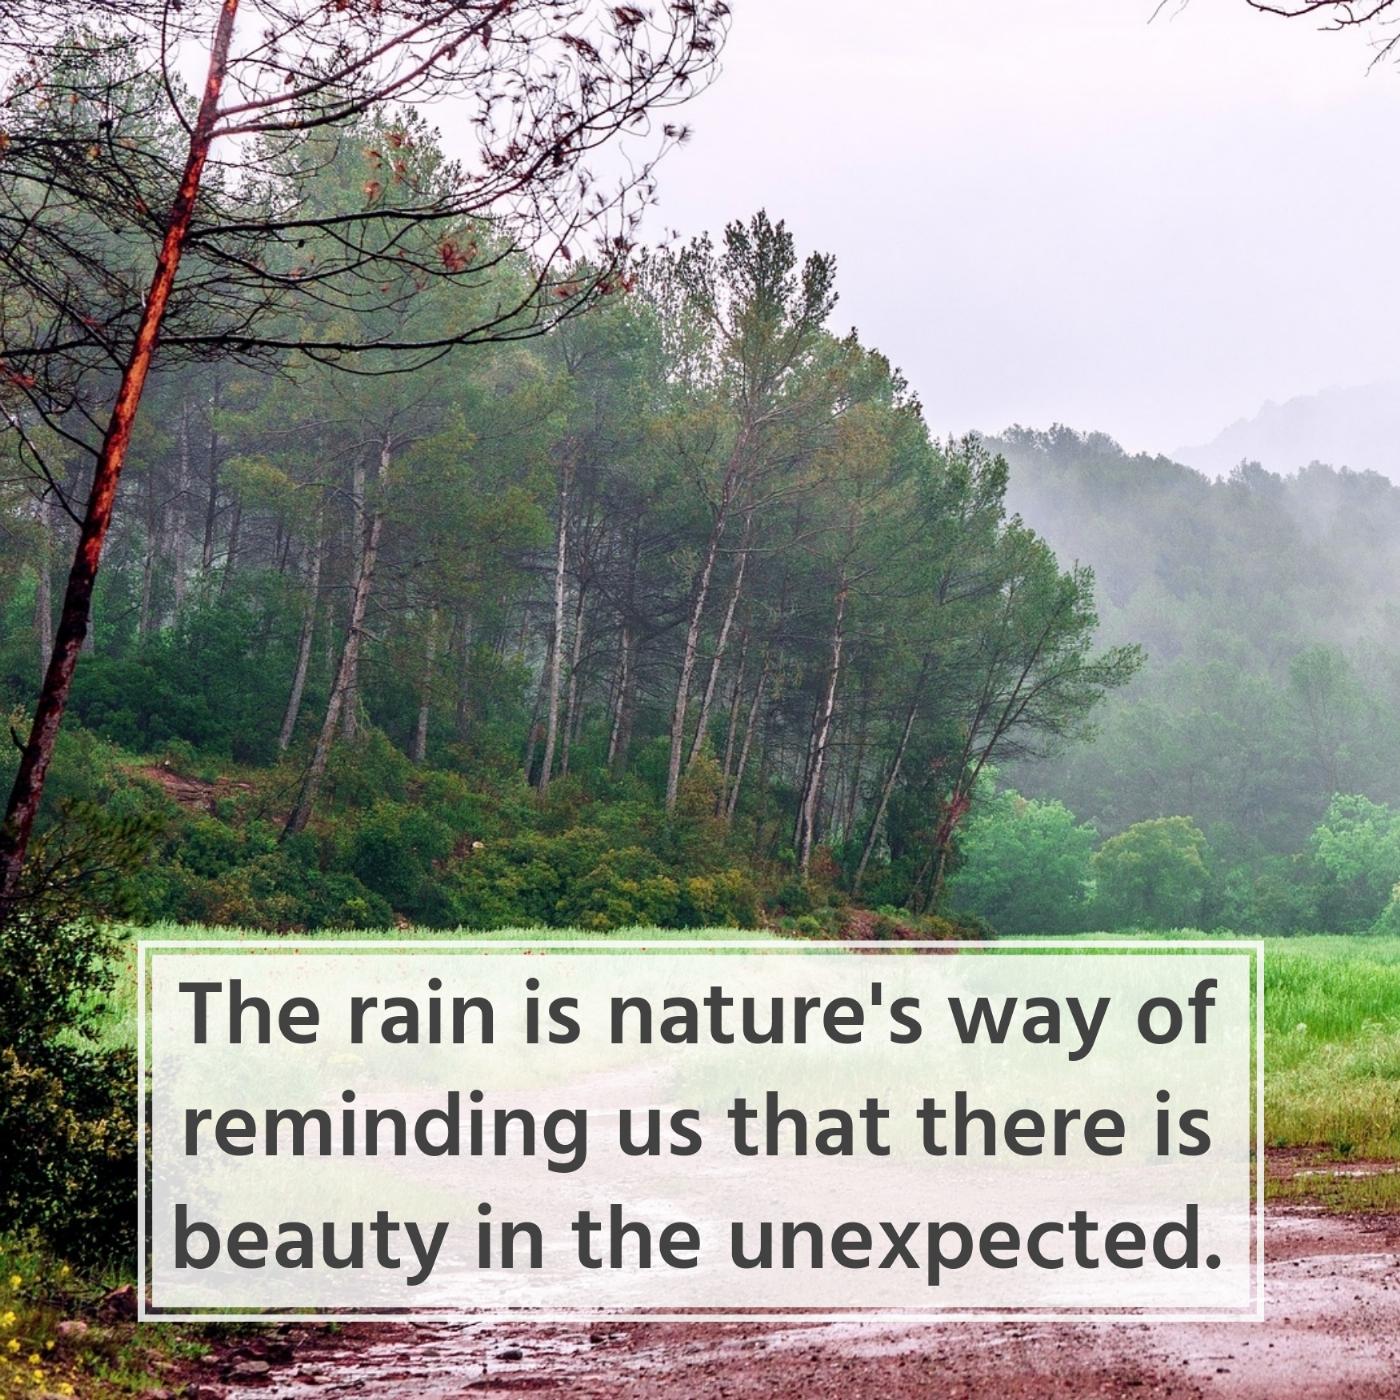 The rain is nature's way of reminding us that there is beauty in the unexpected